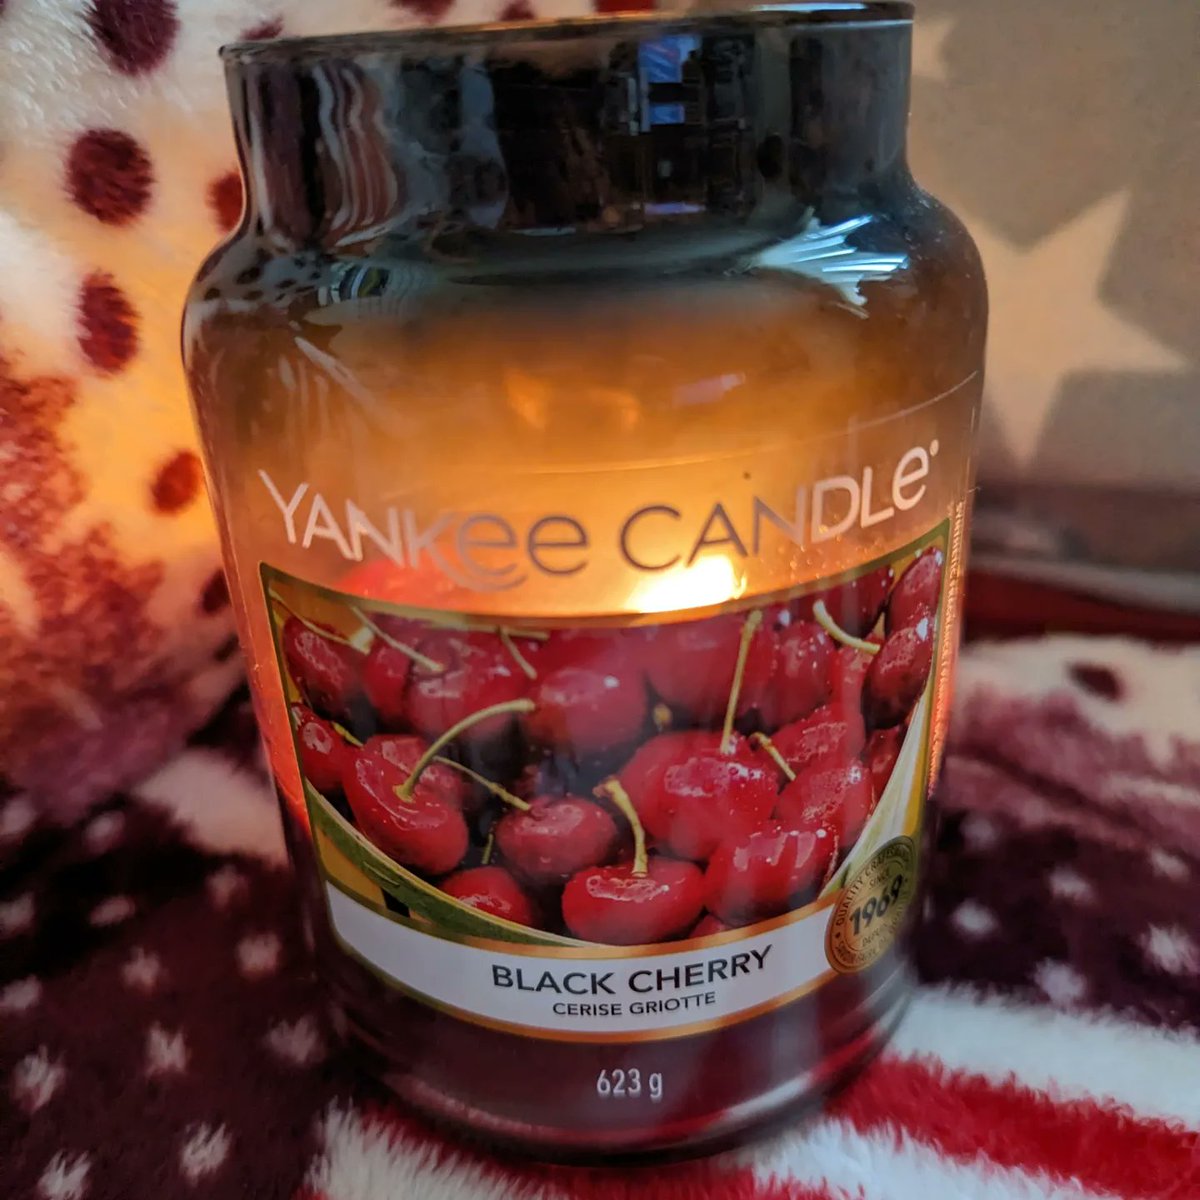 Totally toast but off today so #chill #book #scentedcandle #yankeecandle my fave #blackcherry #currentread #DoNoHarm #author #JackJordan blankets will working hard today 🤣 #bookish #booklove #escapism #catbutt #bookmark #booksandcandles #cozy #metime #recharging xxx